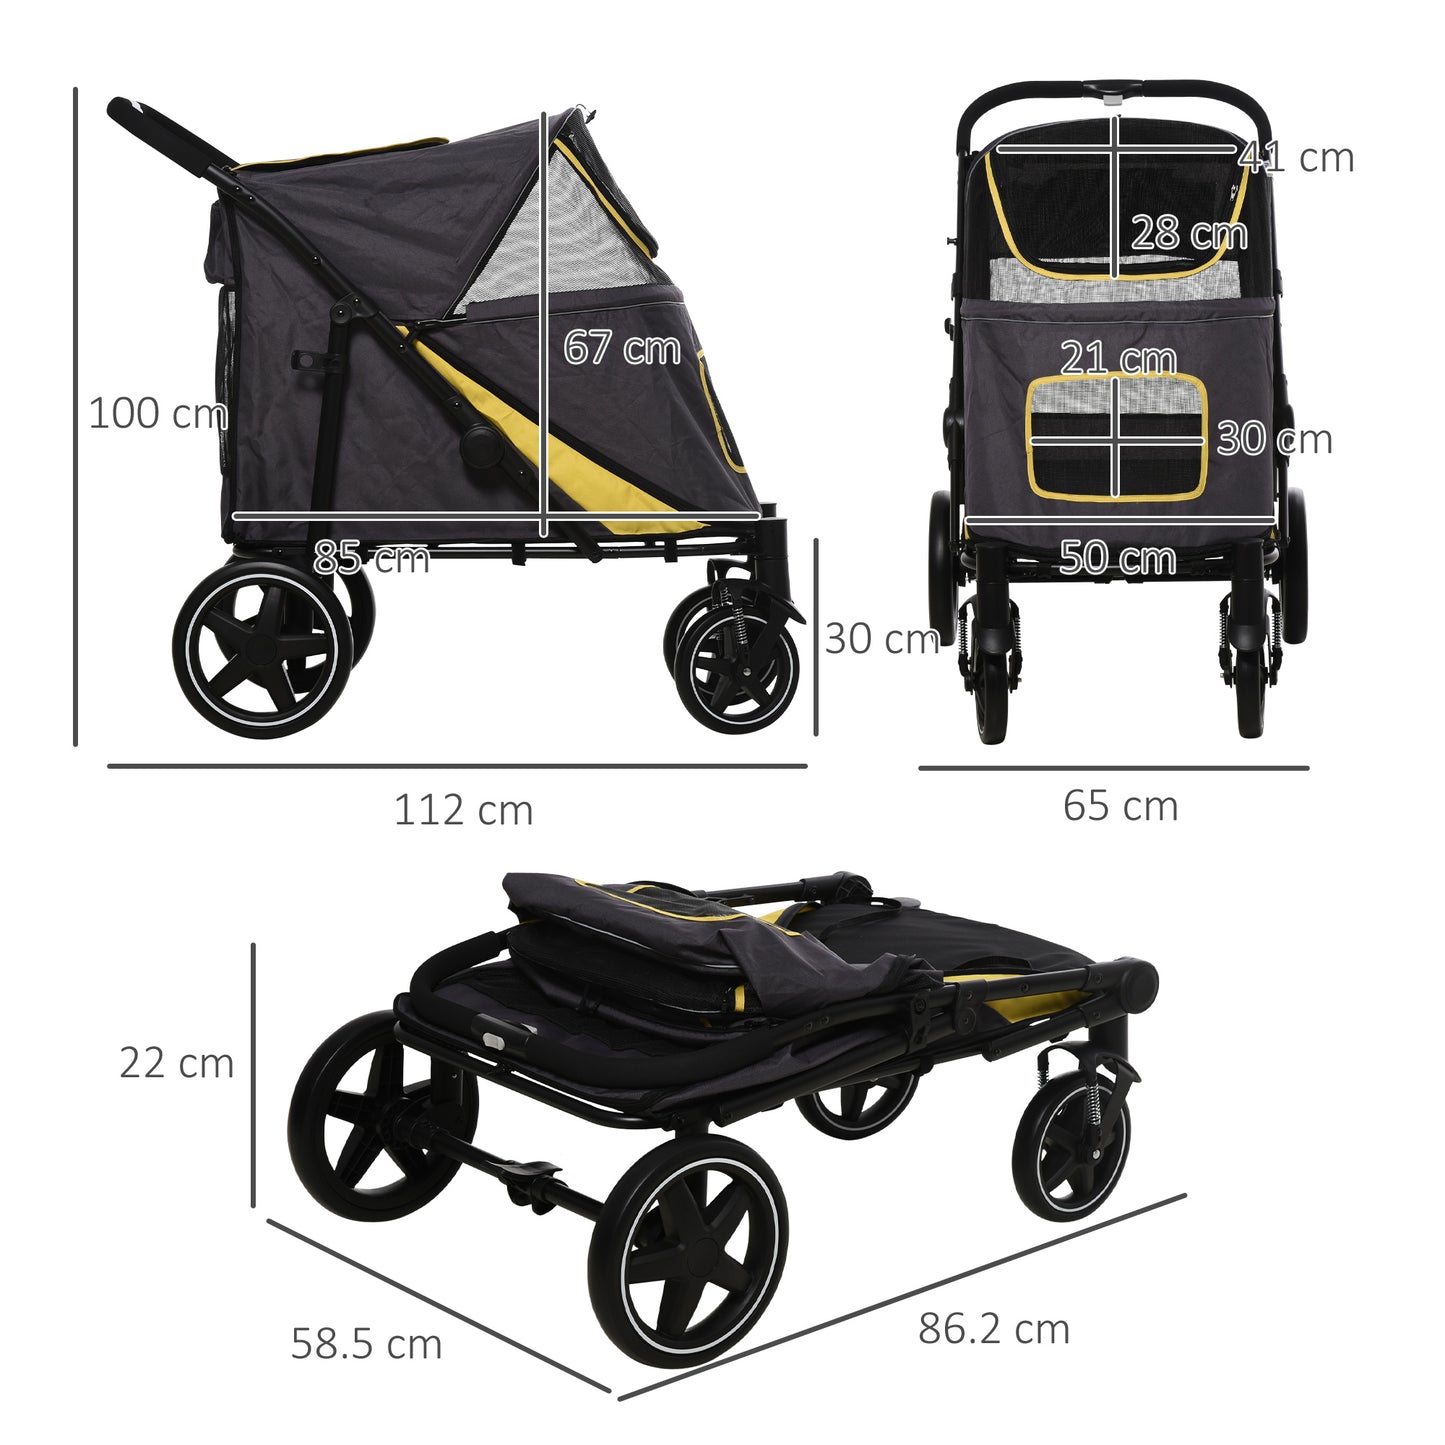 PawHut Pet Stroller with Universal Front Wheels, Shock Absorber, One Click Foldable Dog Cat Carriage with Brakes, Storage Bags, Mesh Window, Safety Leash for Large & Medium-sized Dogs, Dark Grey